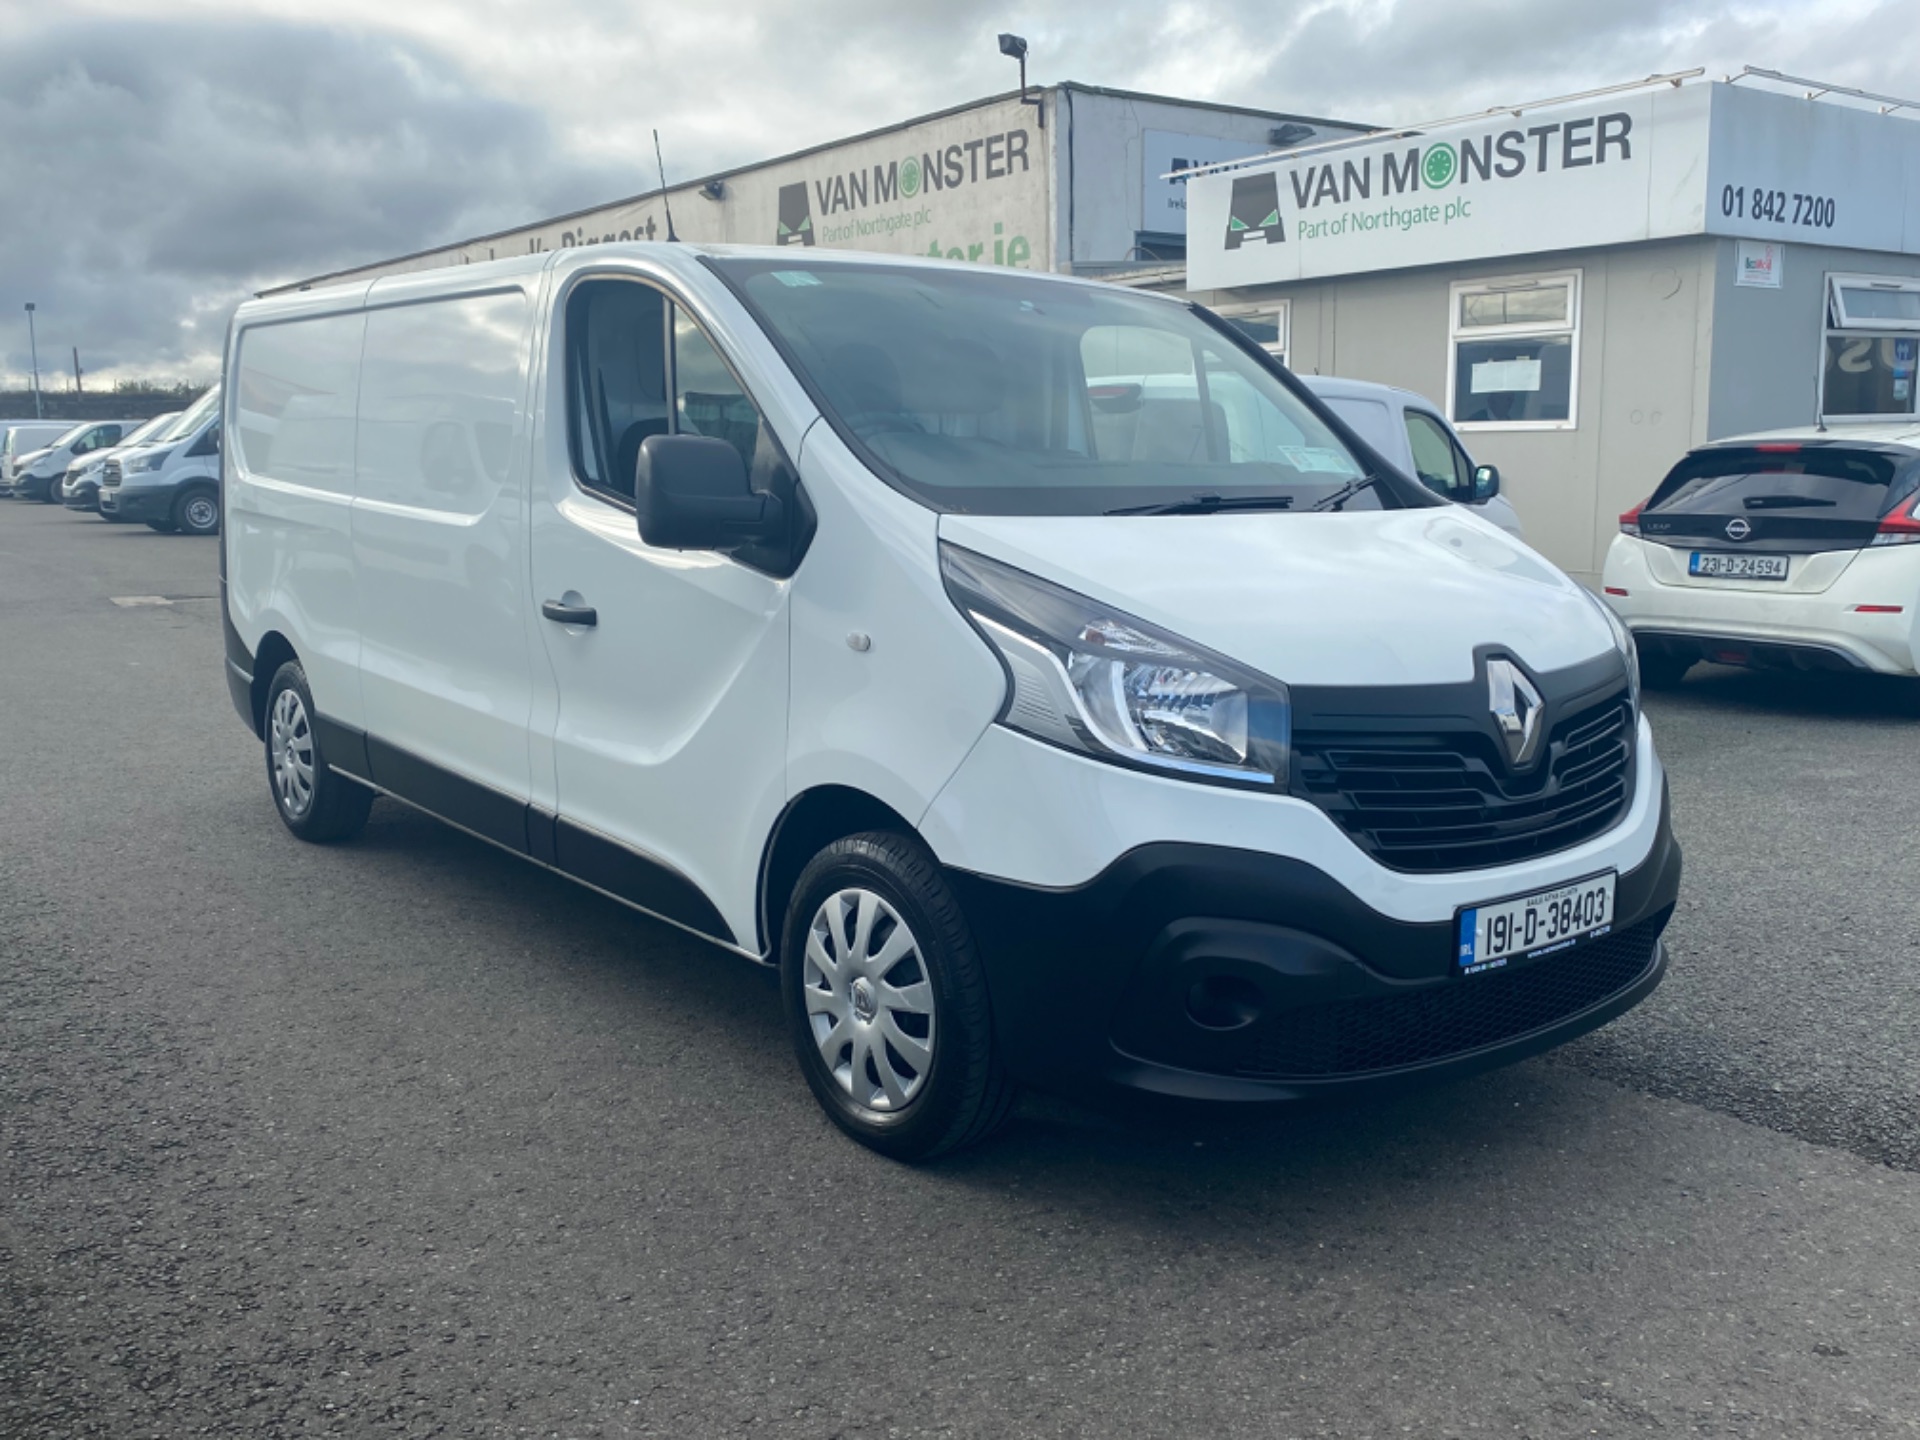 2019 Renault Trafic LL29 DCI 120 Business (191D38403)